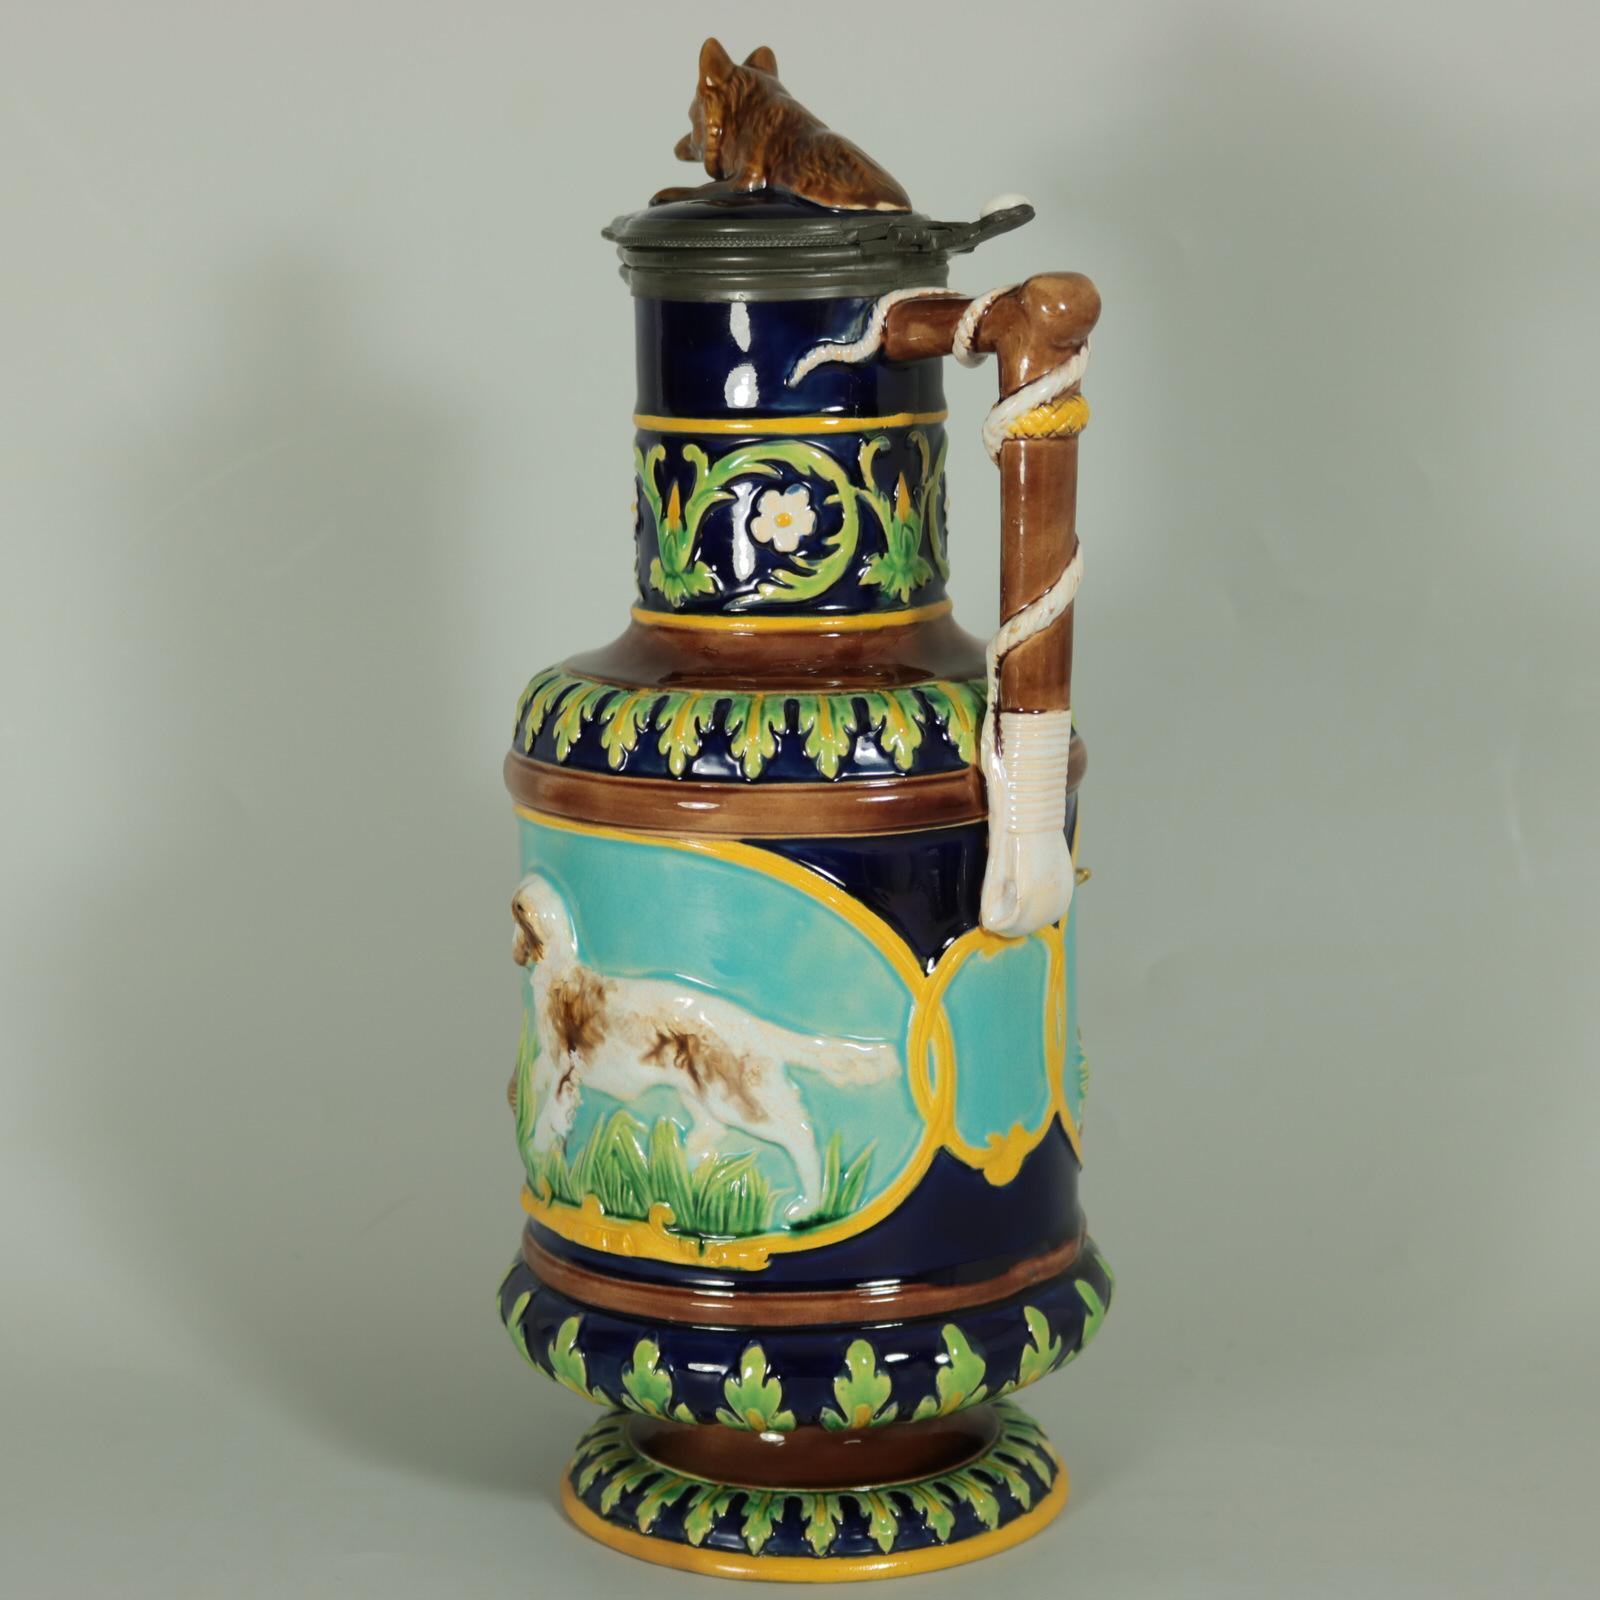 George Jones Majolica jug/pitcher with lid which features pictorial panels on either side, one depicts a retriever chasing a quail, the other a fox waiting to pounce on a rabbit. Colouration: cobalt blue, turquoise, green, are predominant. English